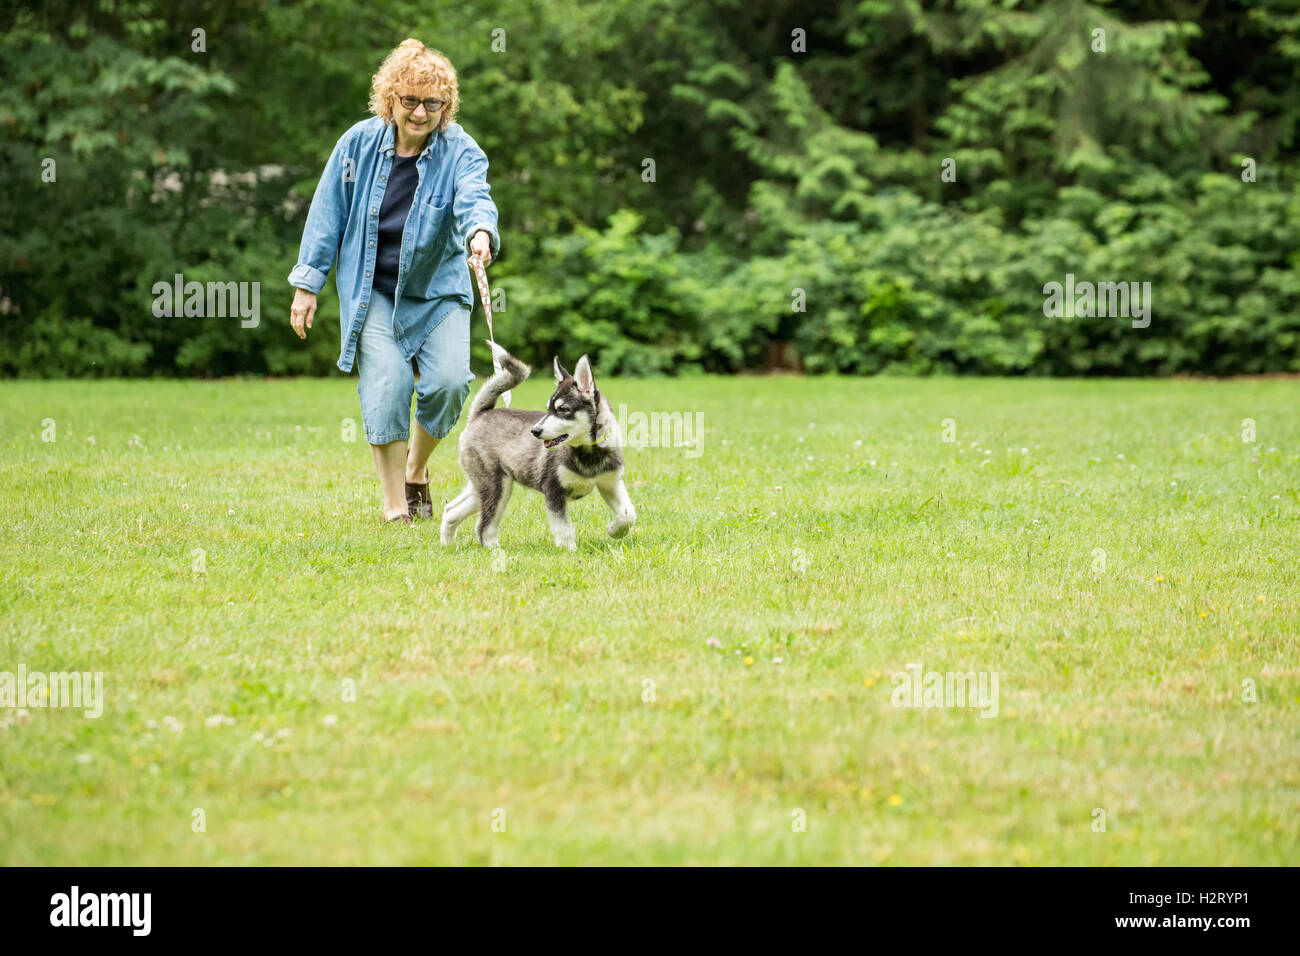 Dashiell, a three month old Alaskan Malamute puppy tugging on his leash during a walk in a local park, in Issaquah, Washington, Stock Photo